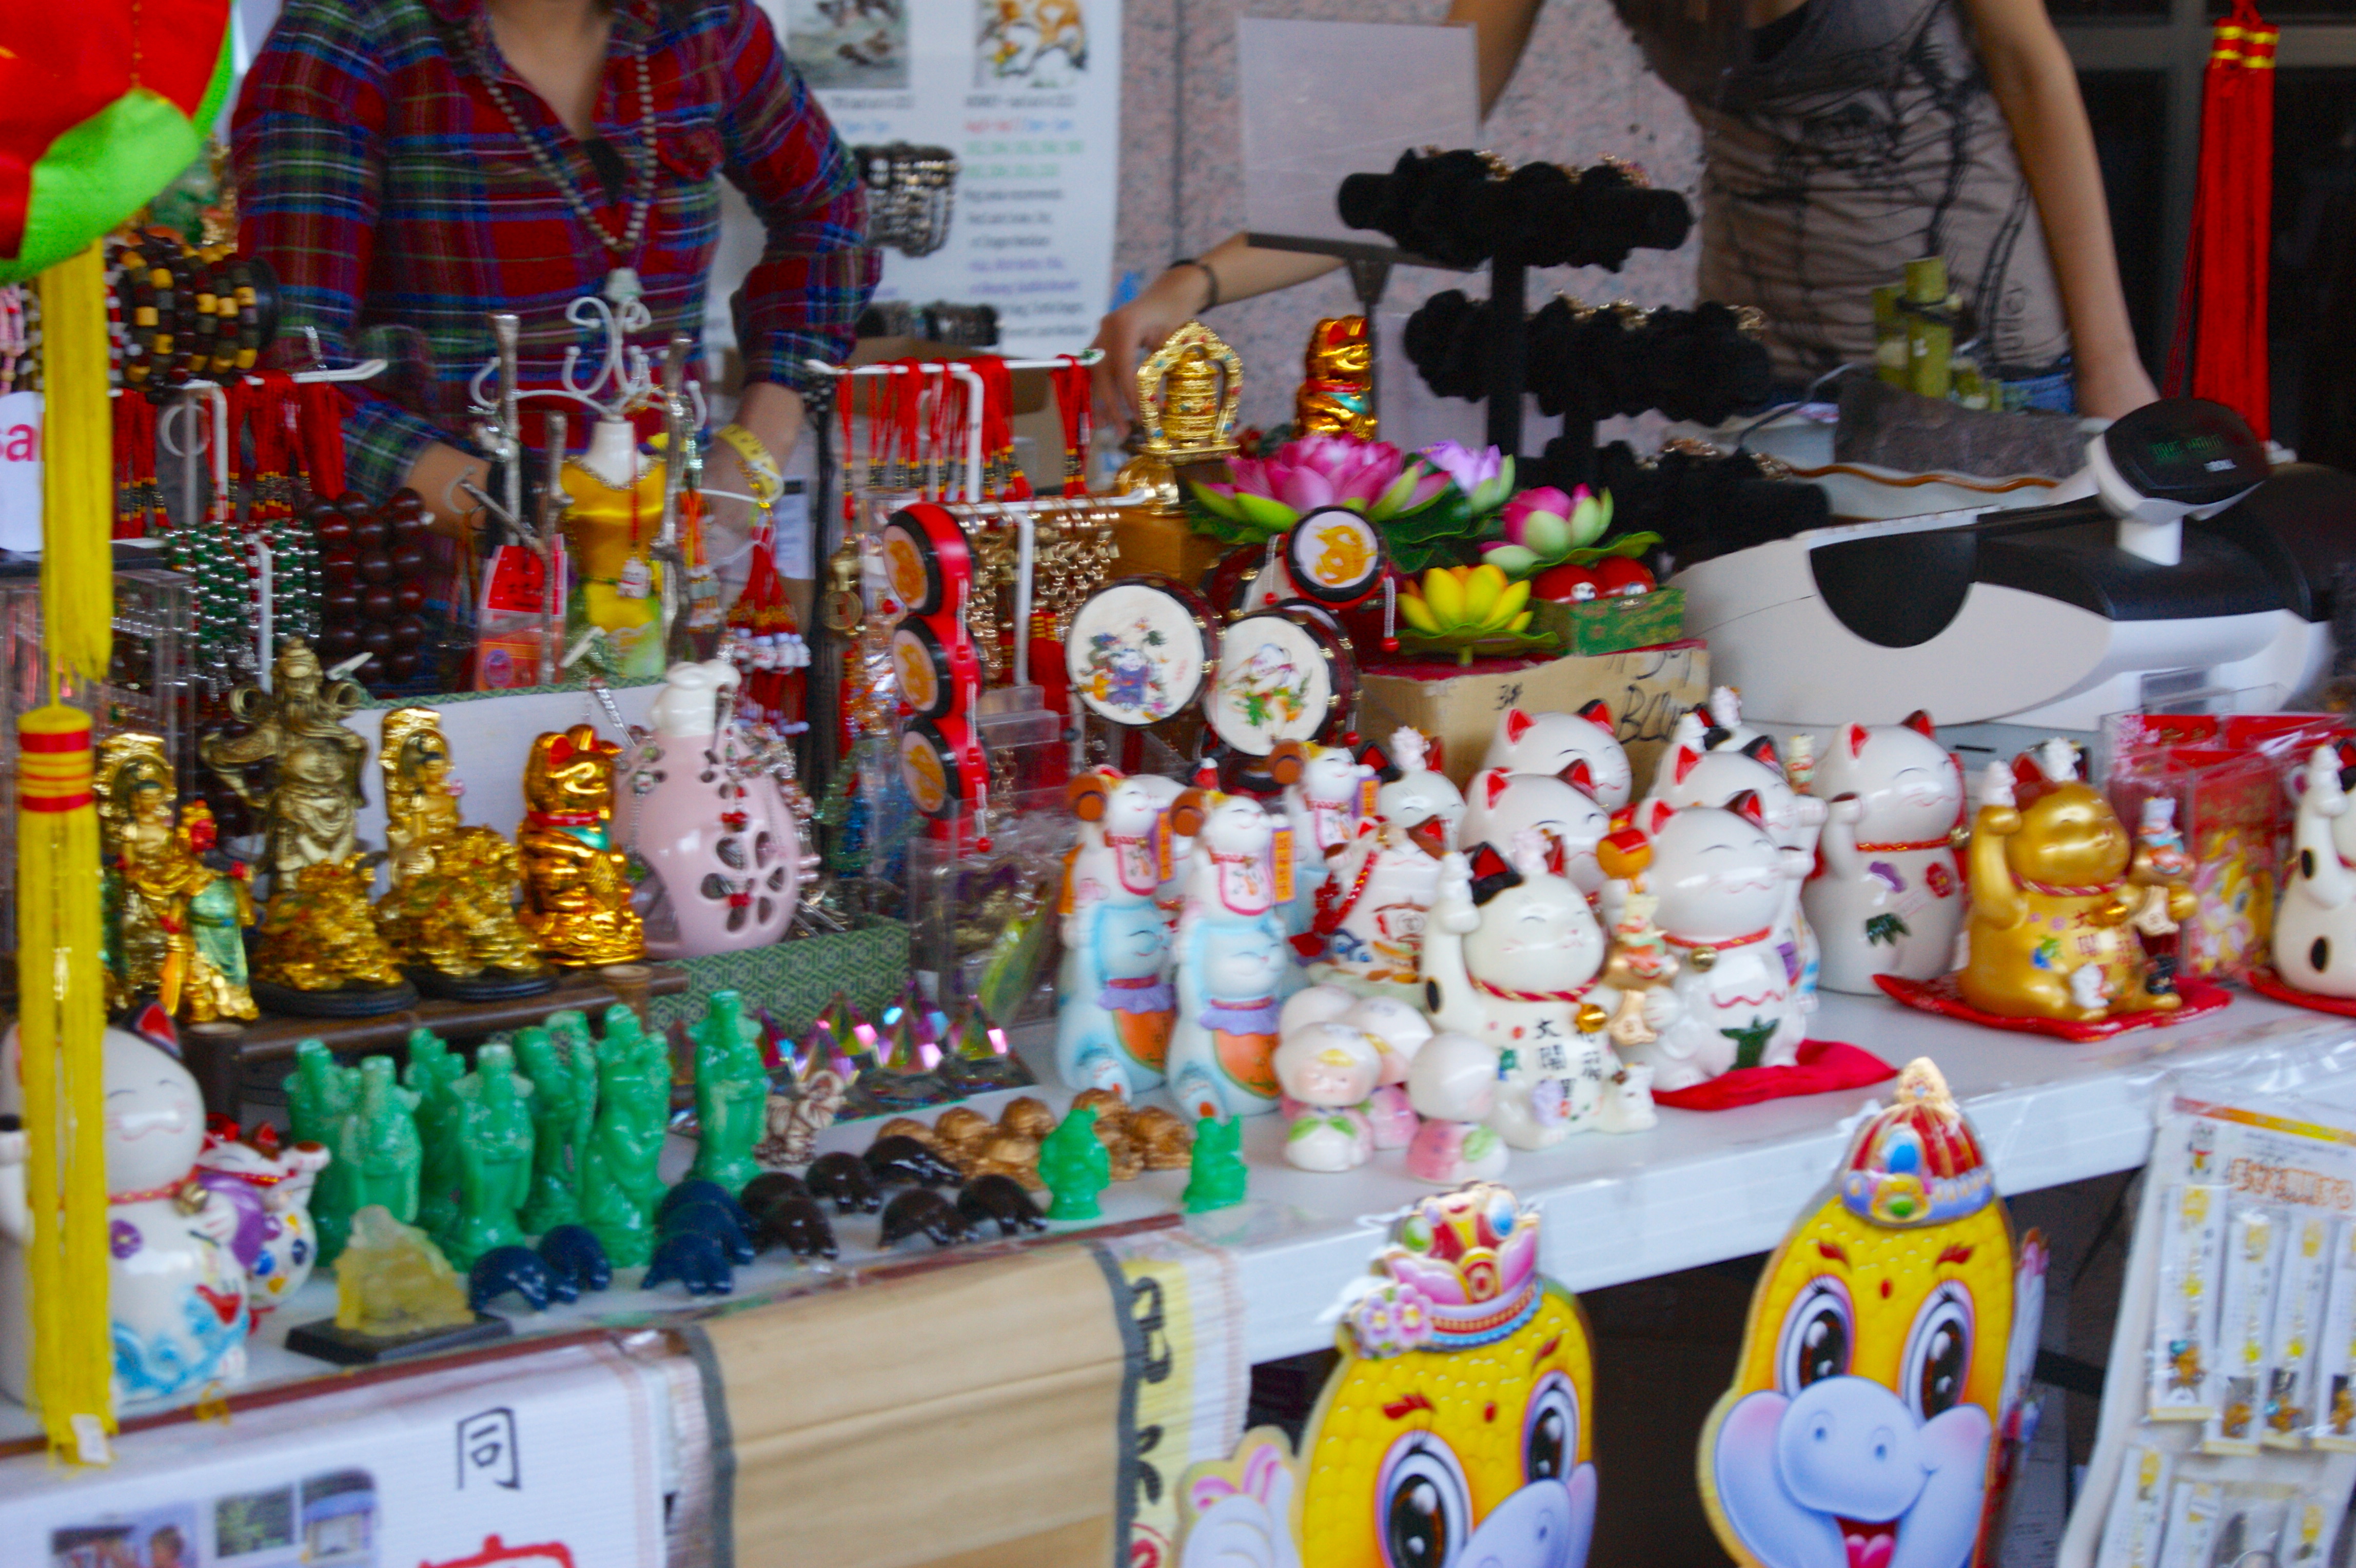 Crafts for sale at the festival